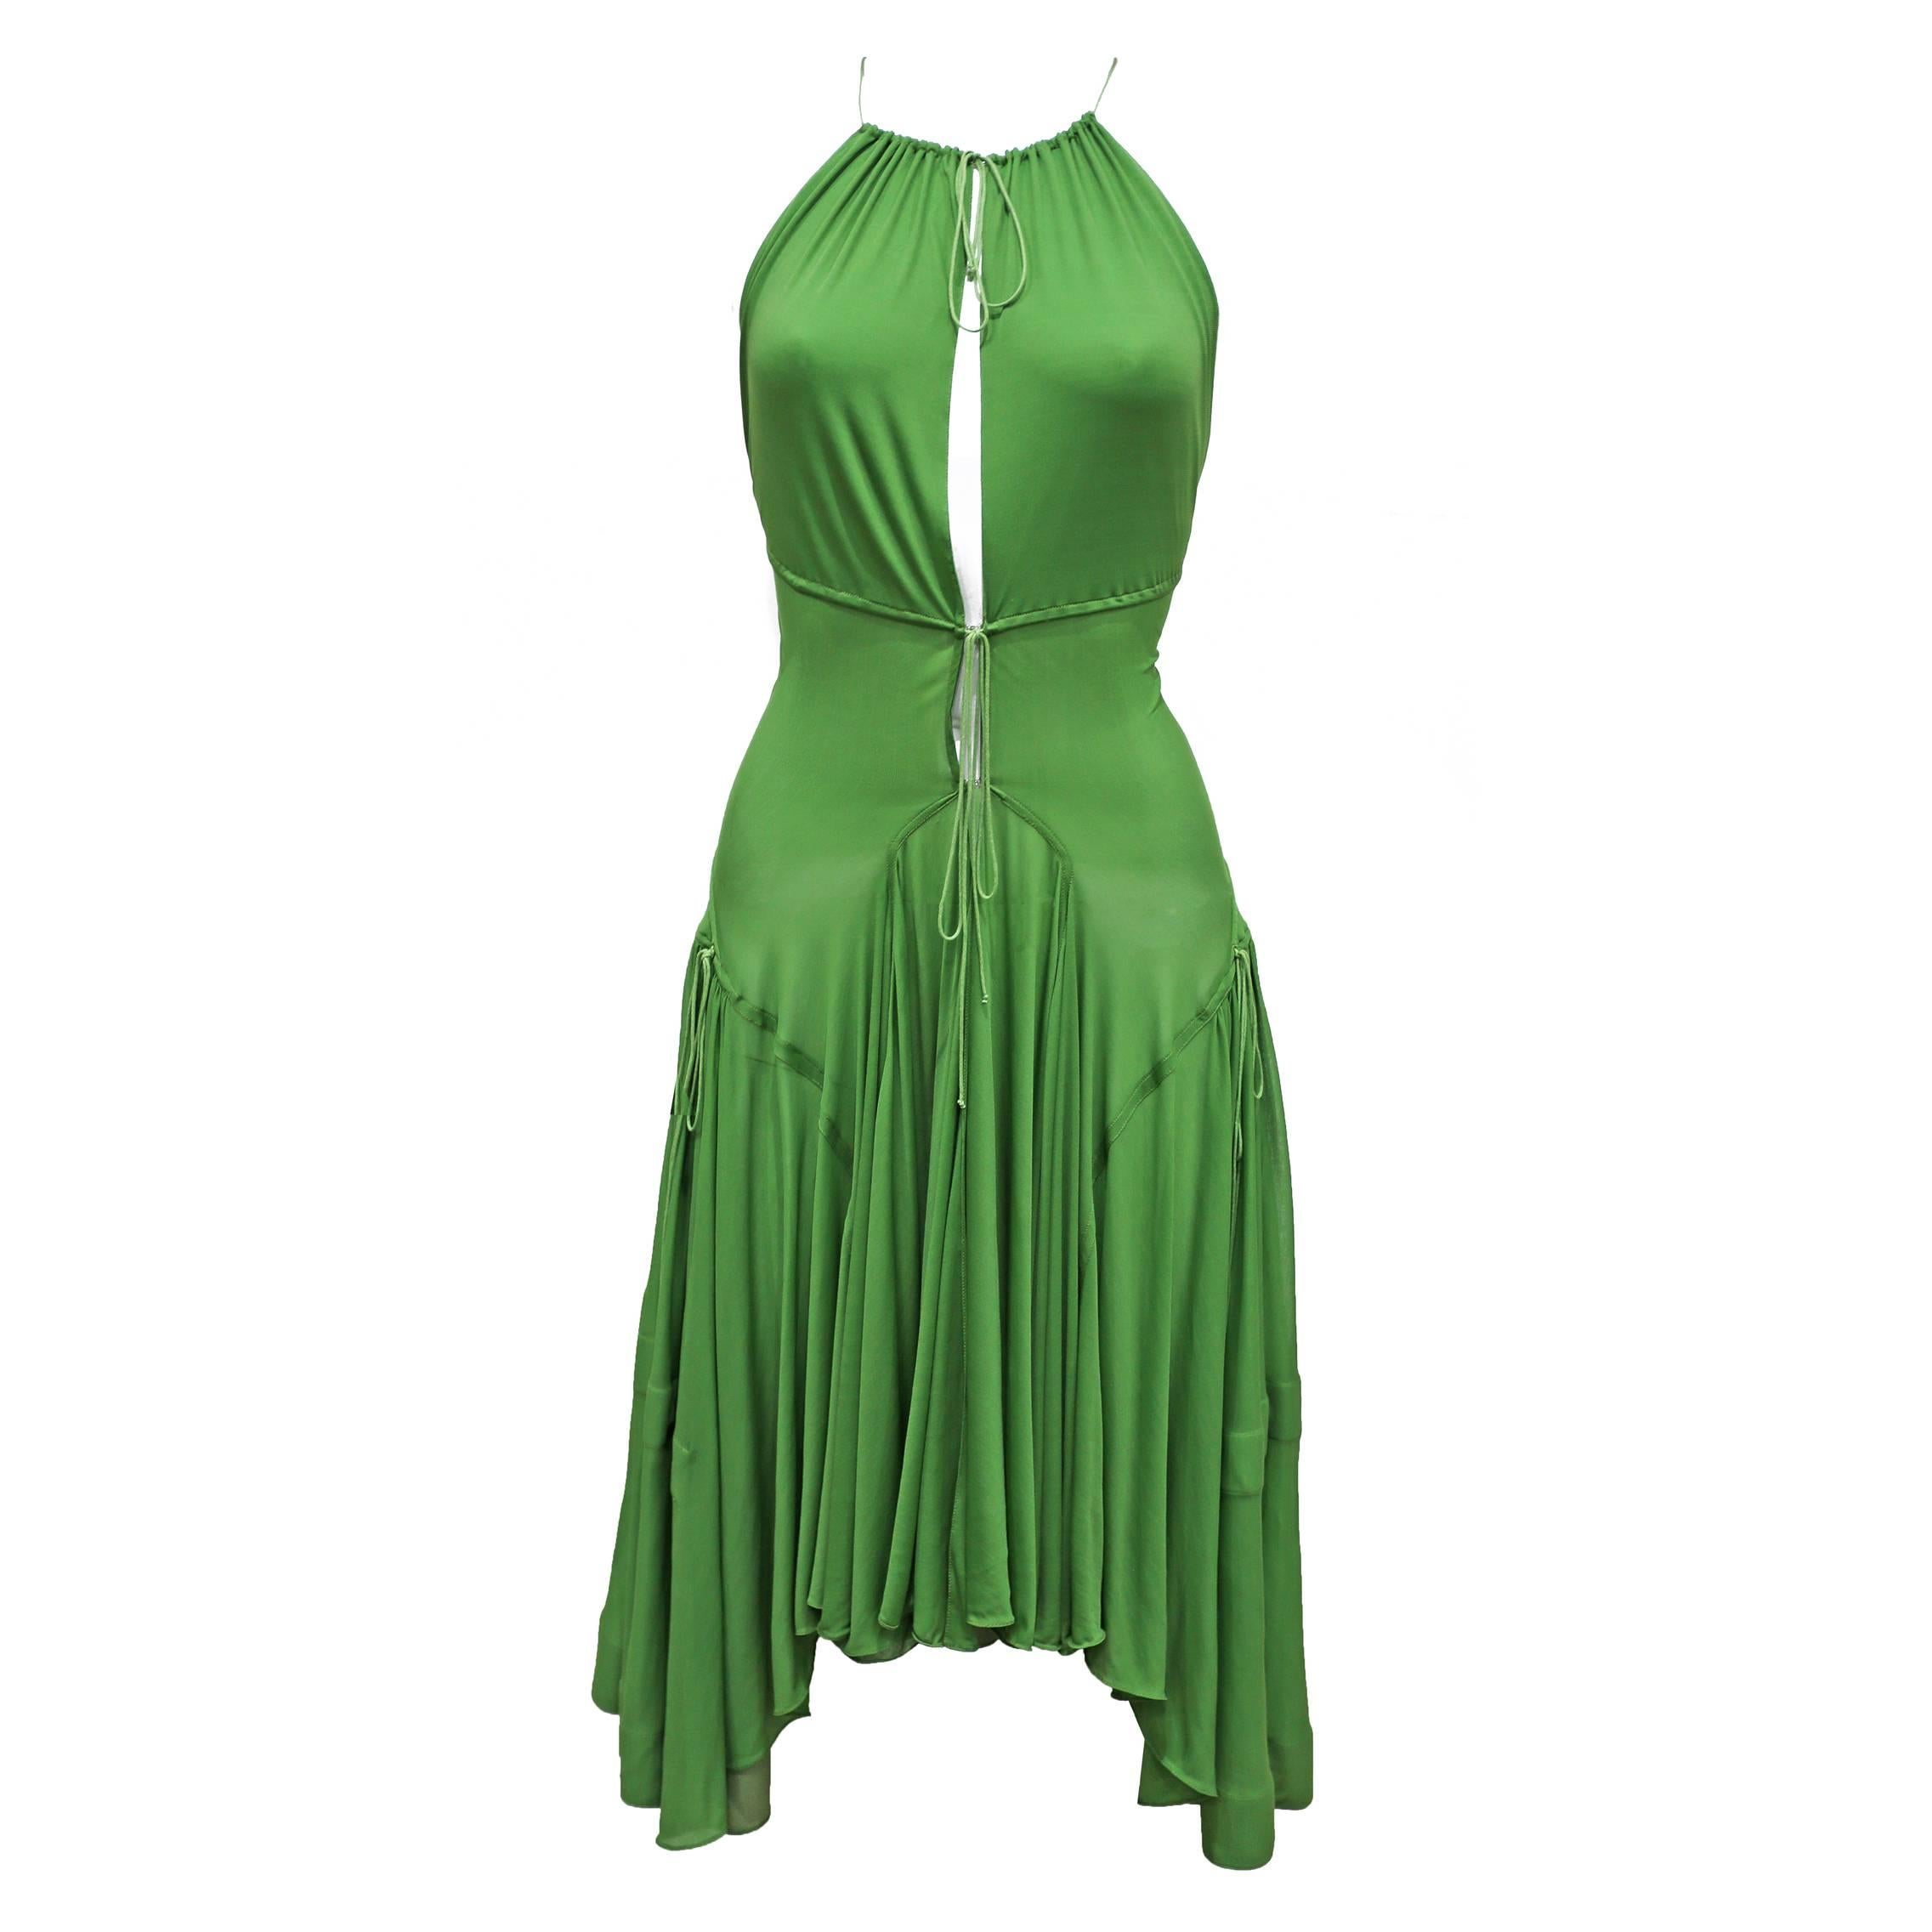 Alaia green lace up pleated evening dress